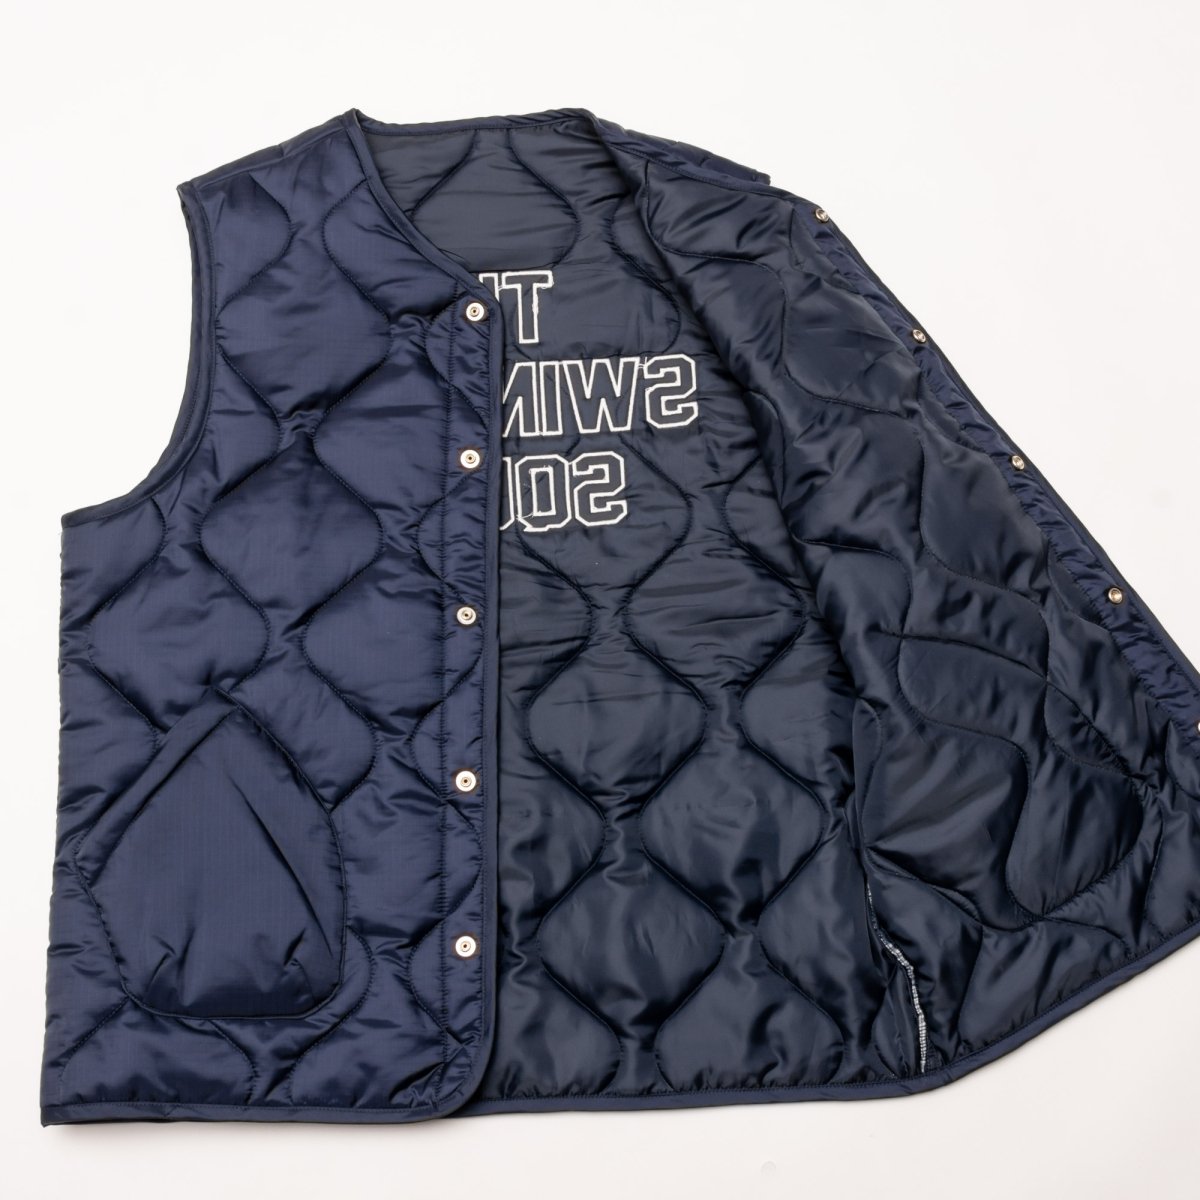 SWG QUILTED VEST,NAVY - THE SWINGGGR ONLINE STORE